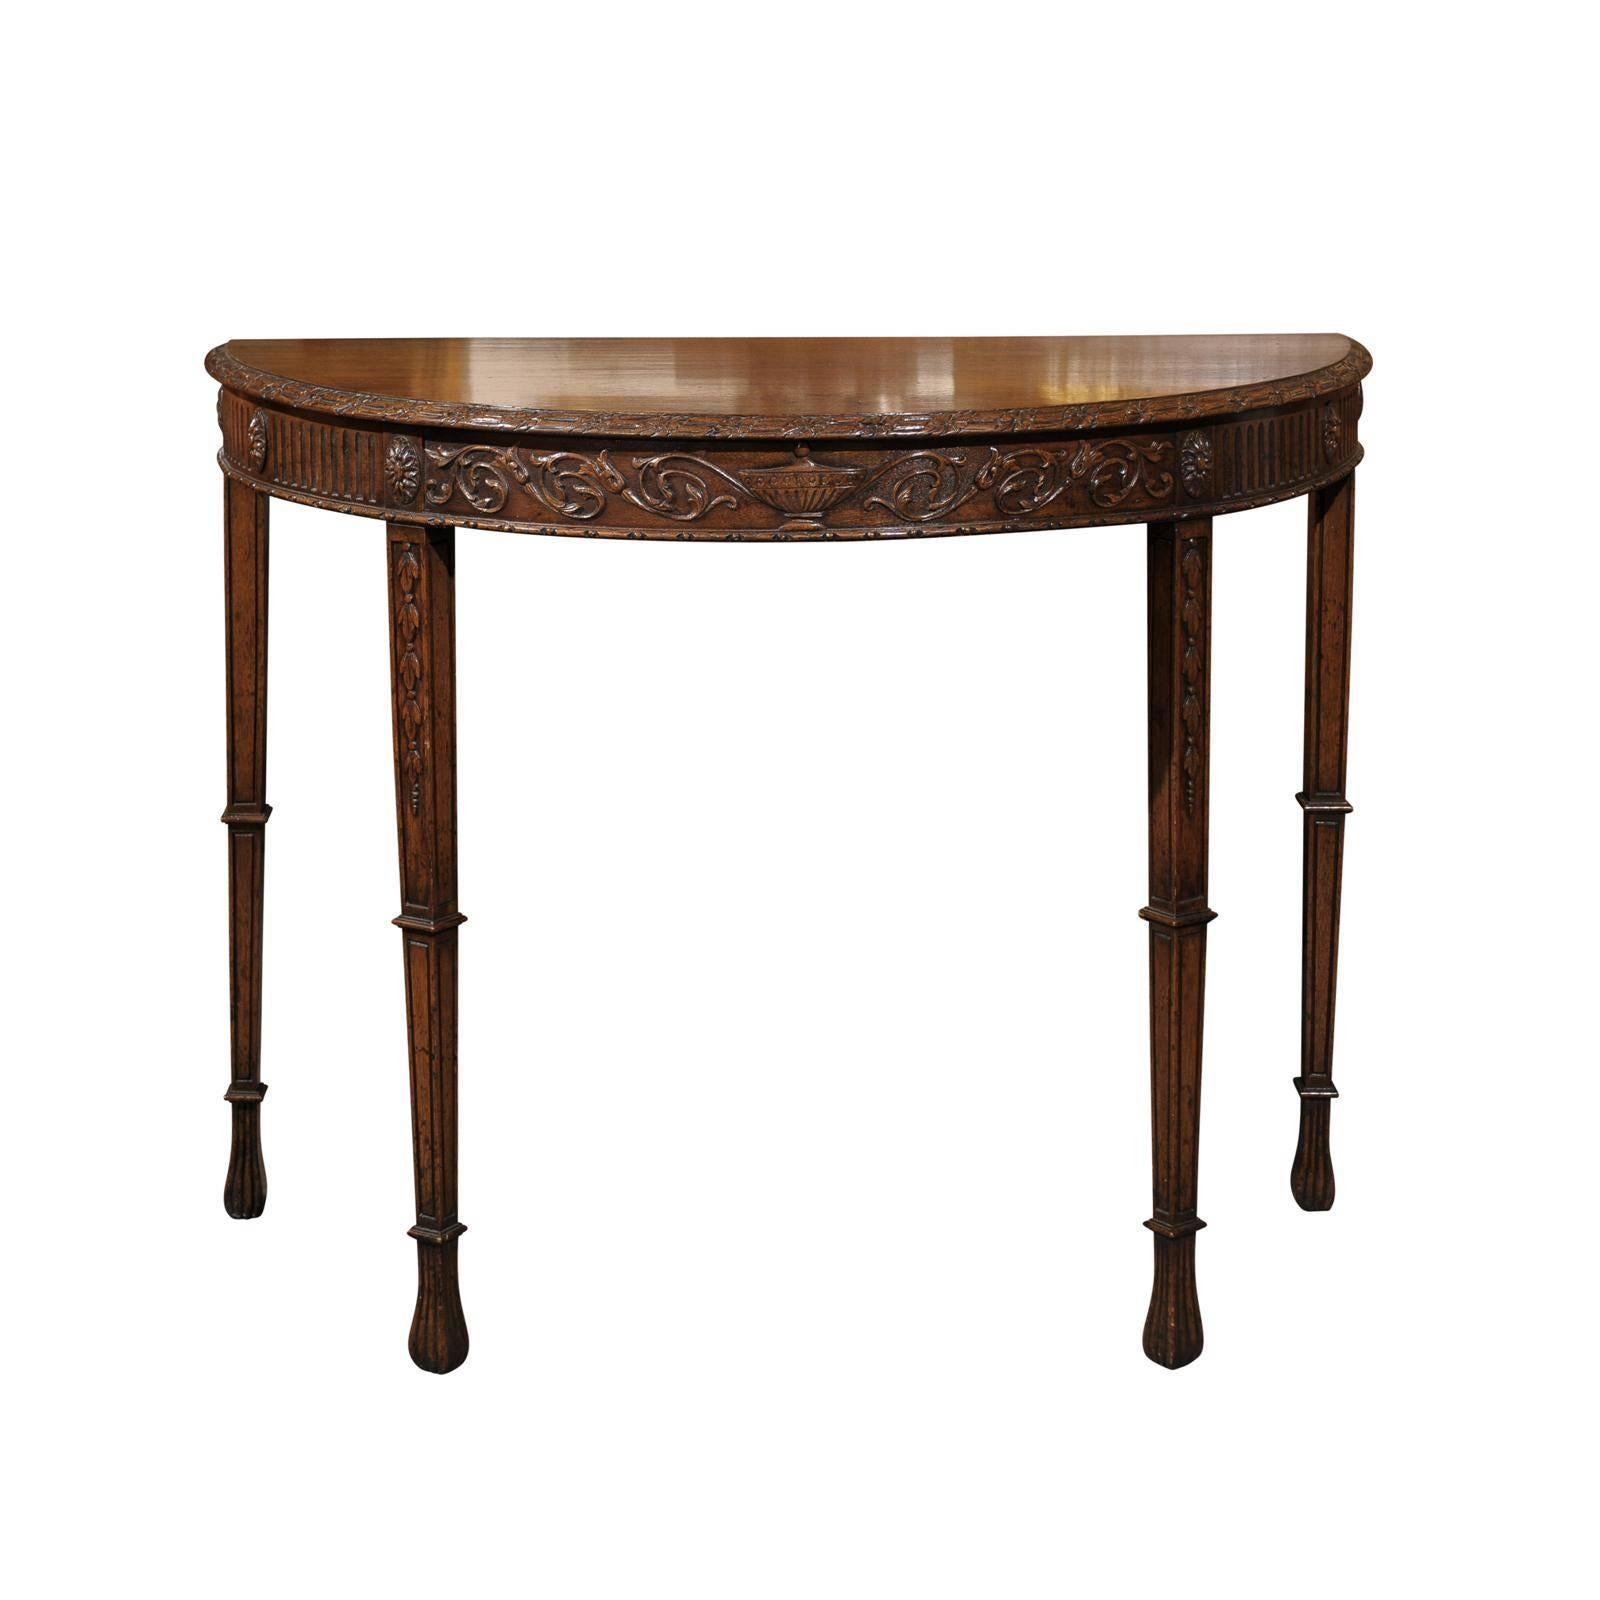 English Turn of the Century Wooden Demi-Lune Table with Carved Apron